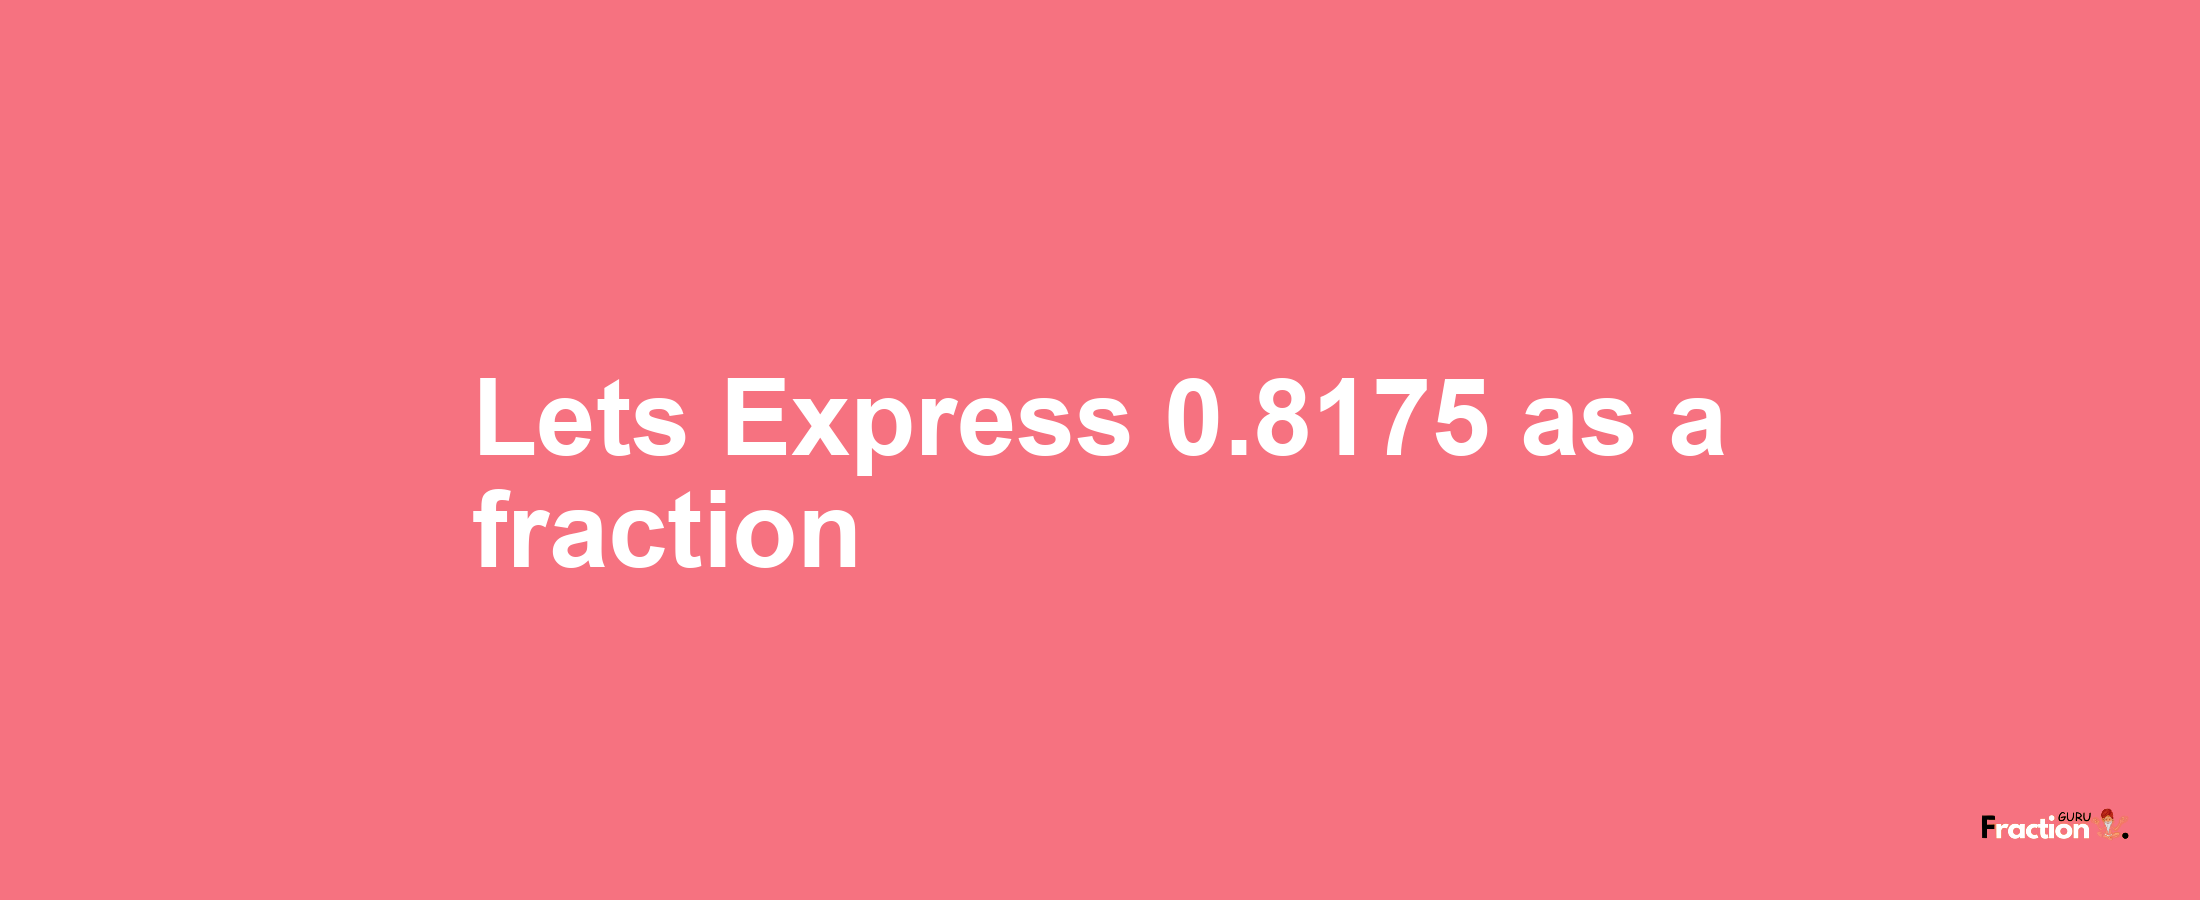 Lets Express 0.8175 as afraction